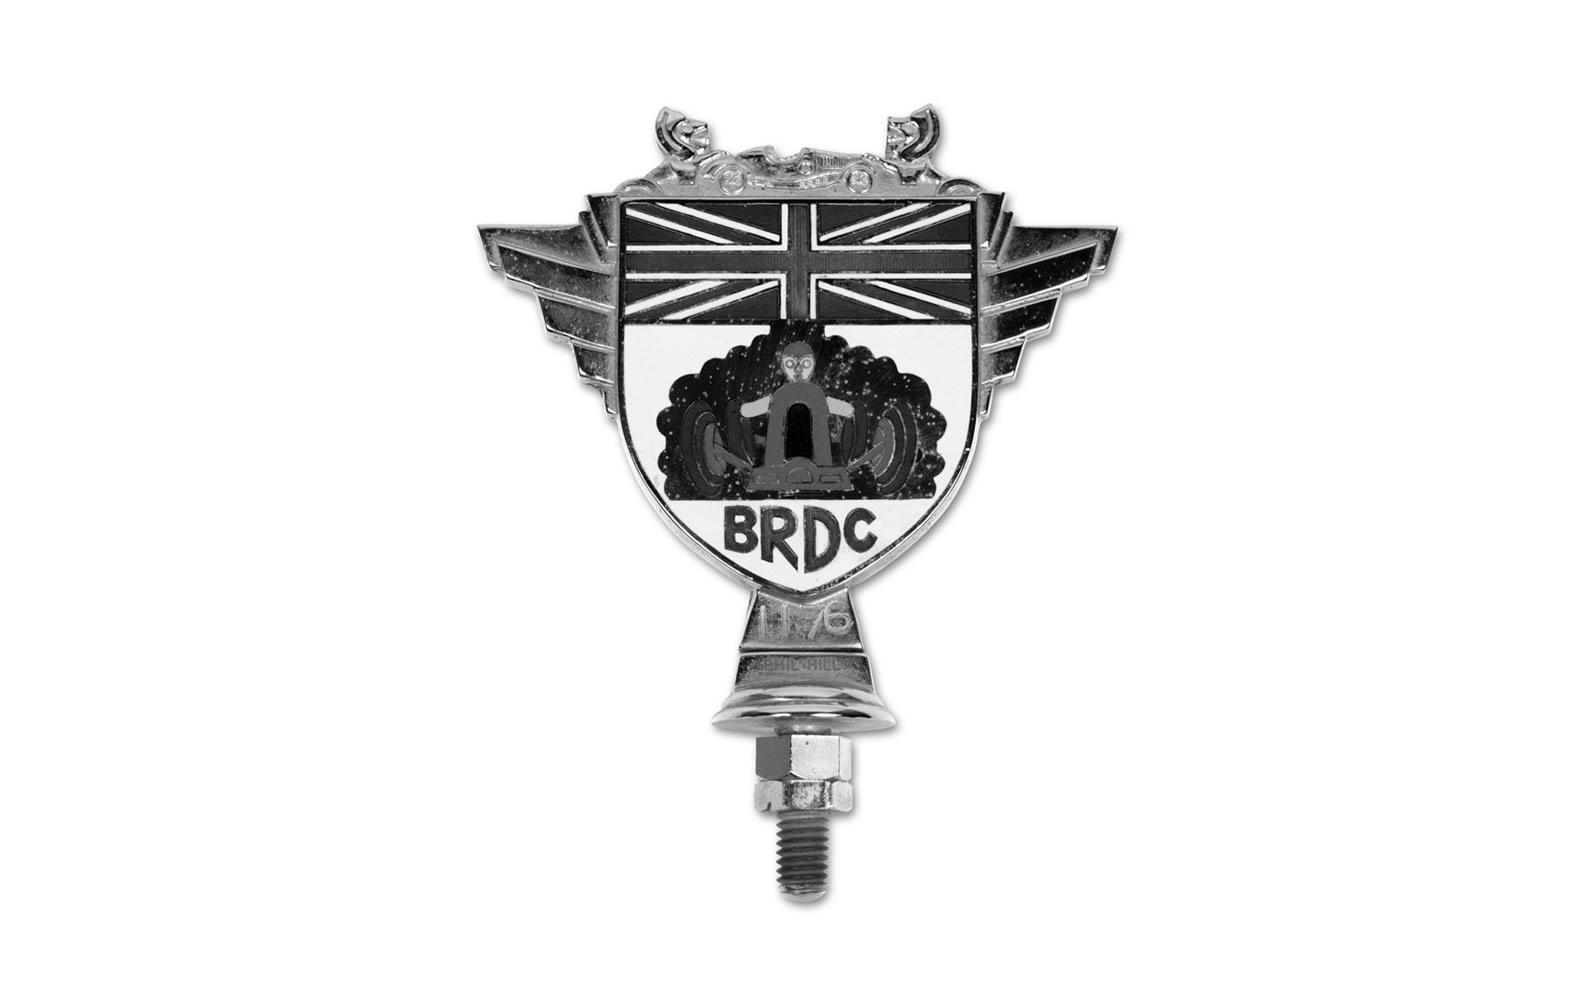 Phil Hill's Personal BRDC Badge